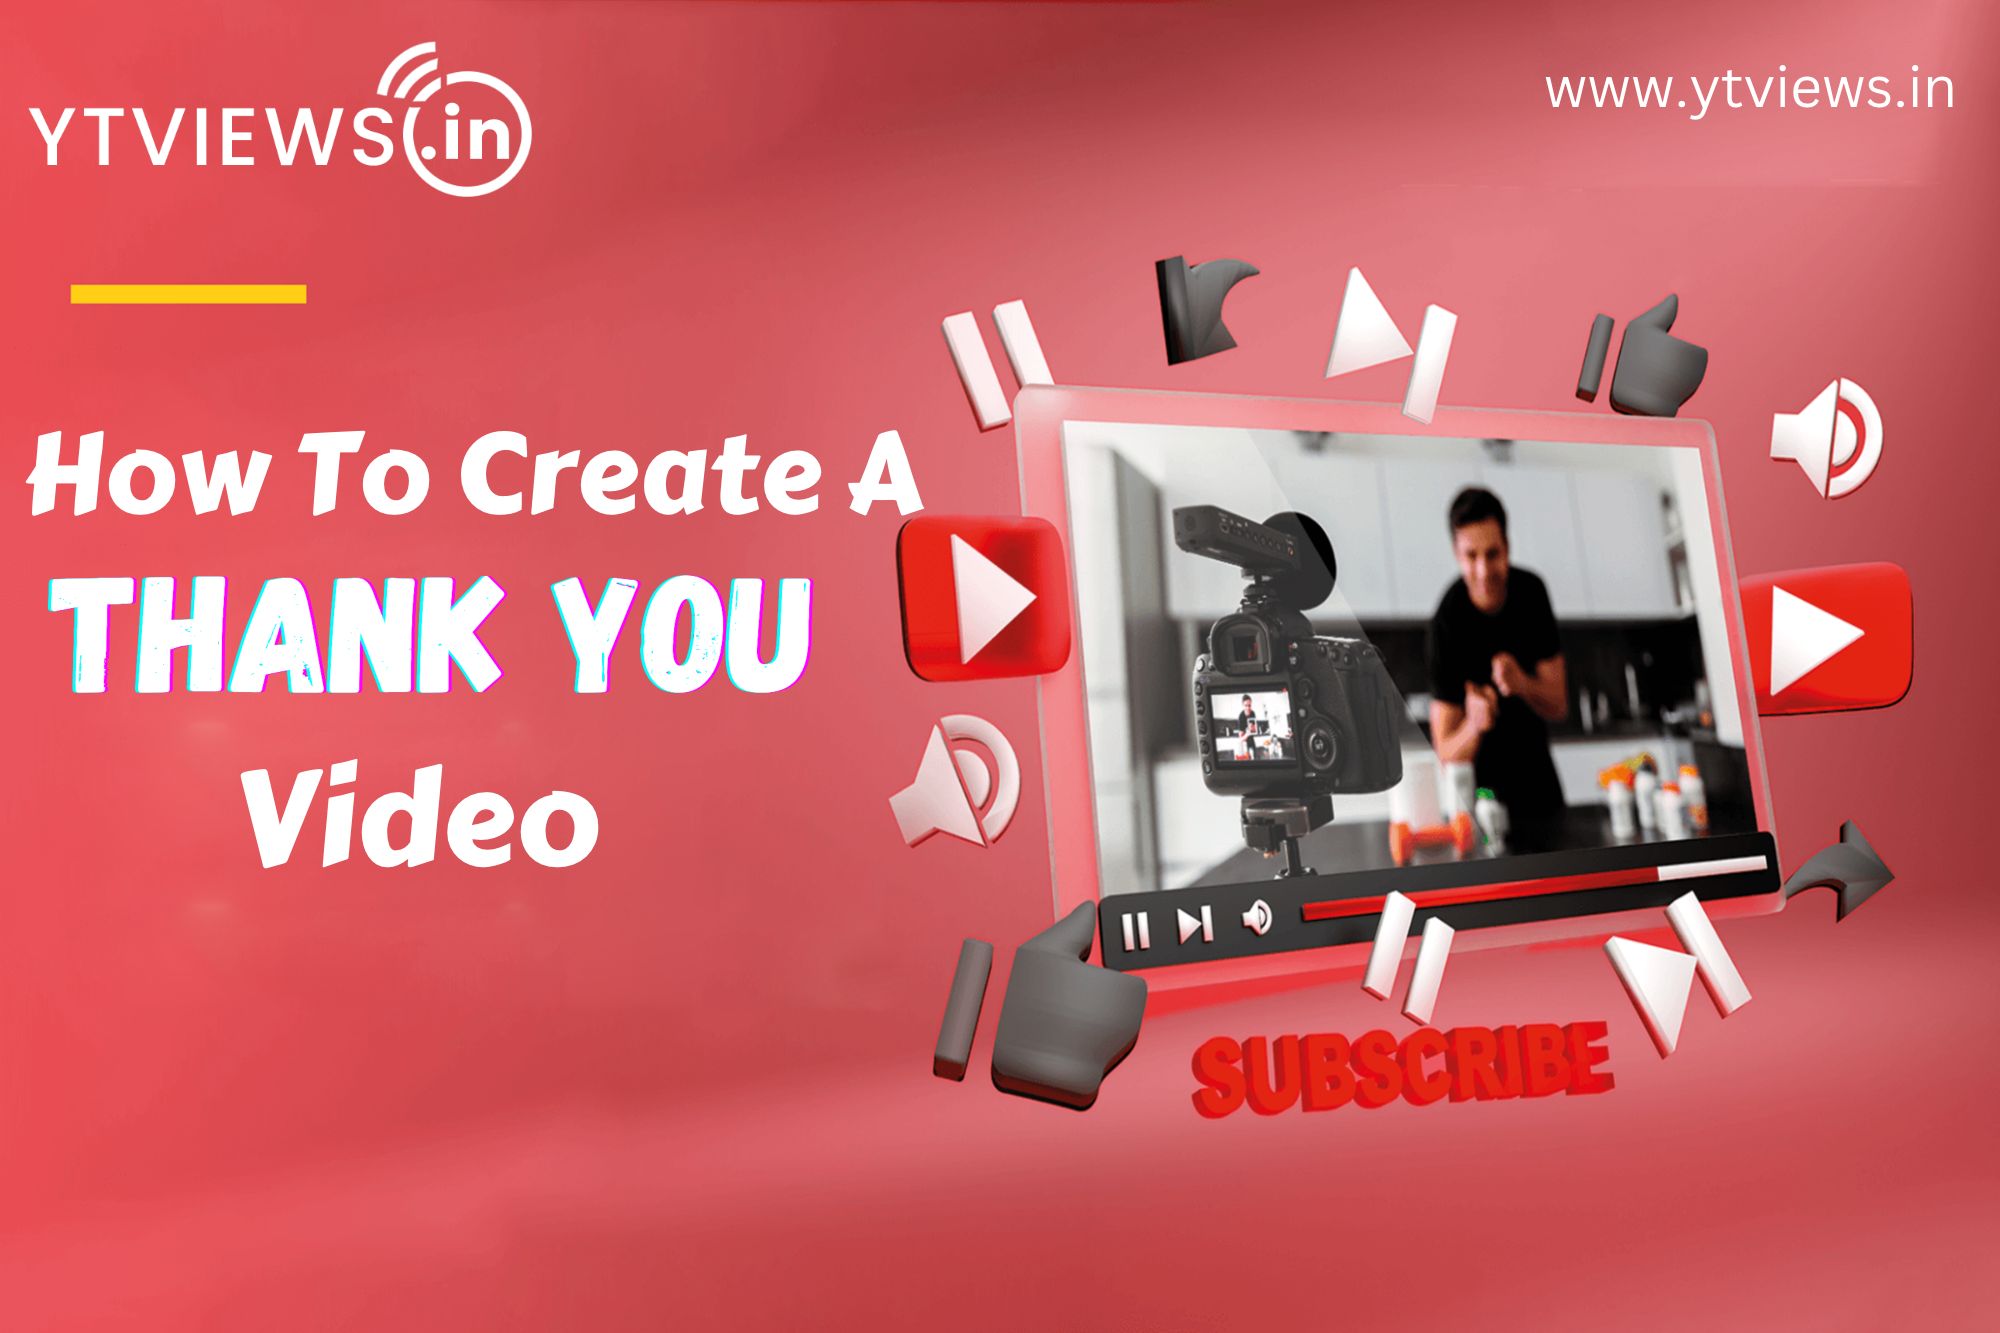 How to create a Thank You video